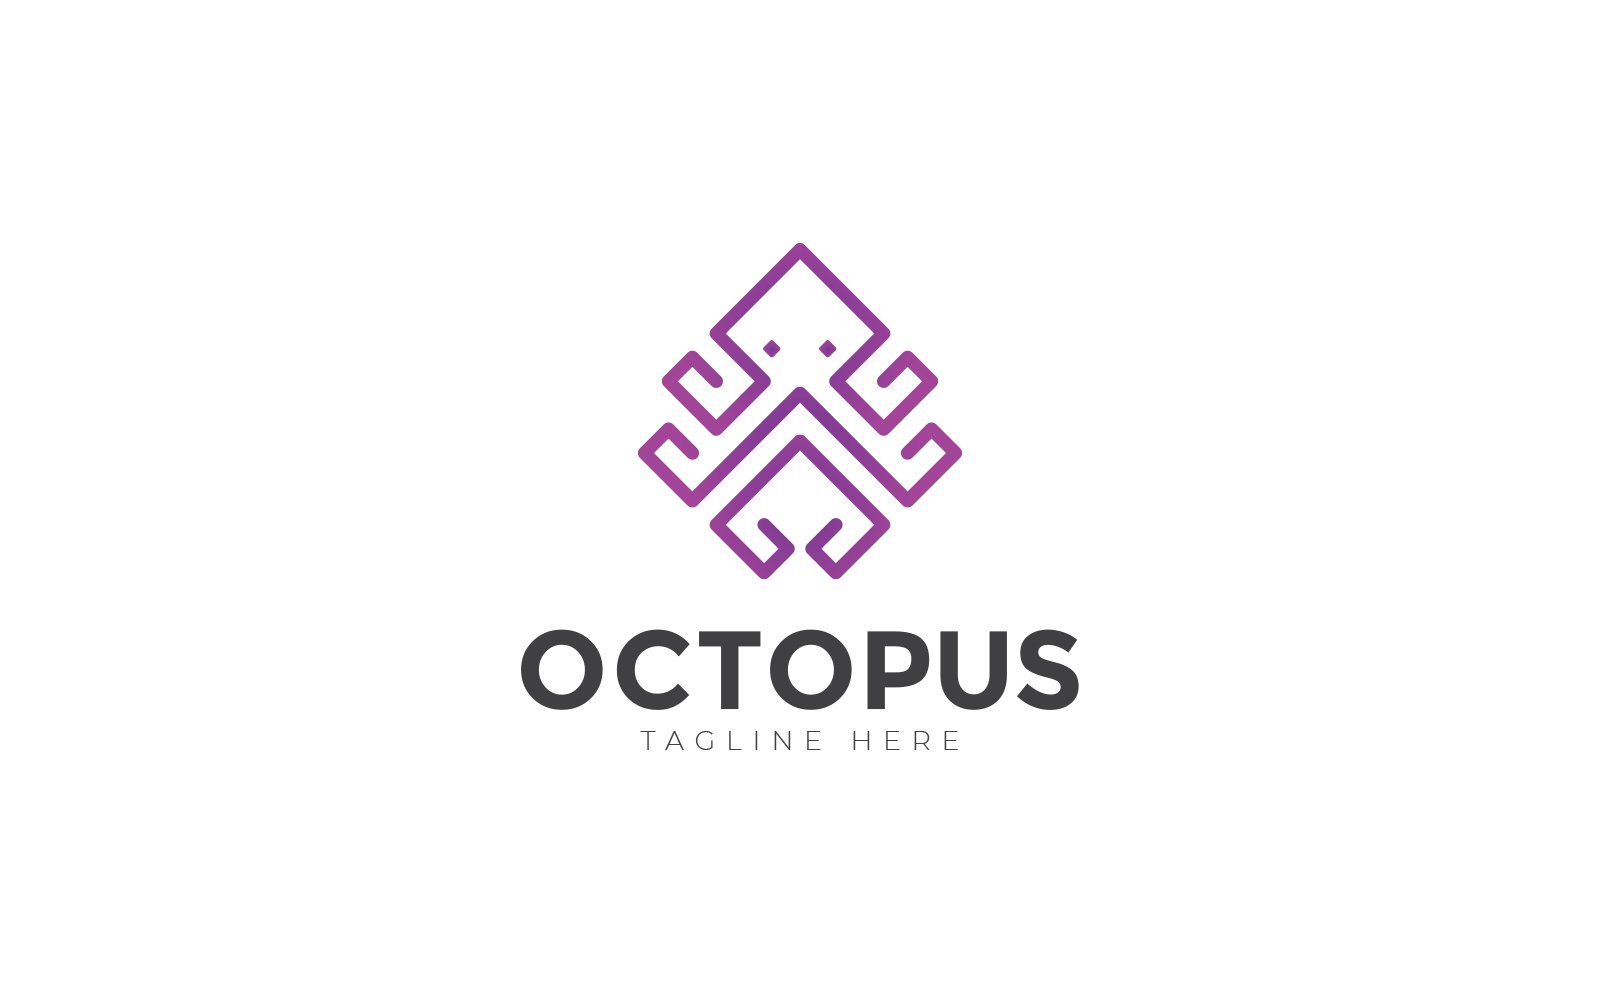 Octopus logo template image_picture free download 450011063_lovepik.com